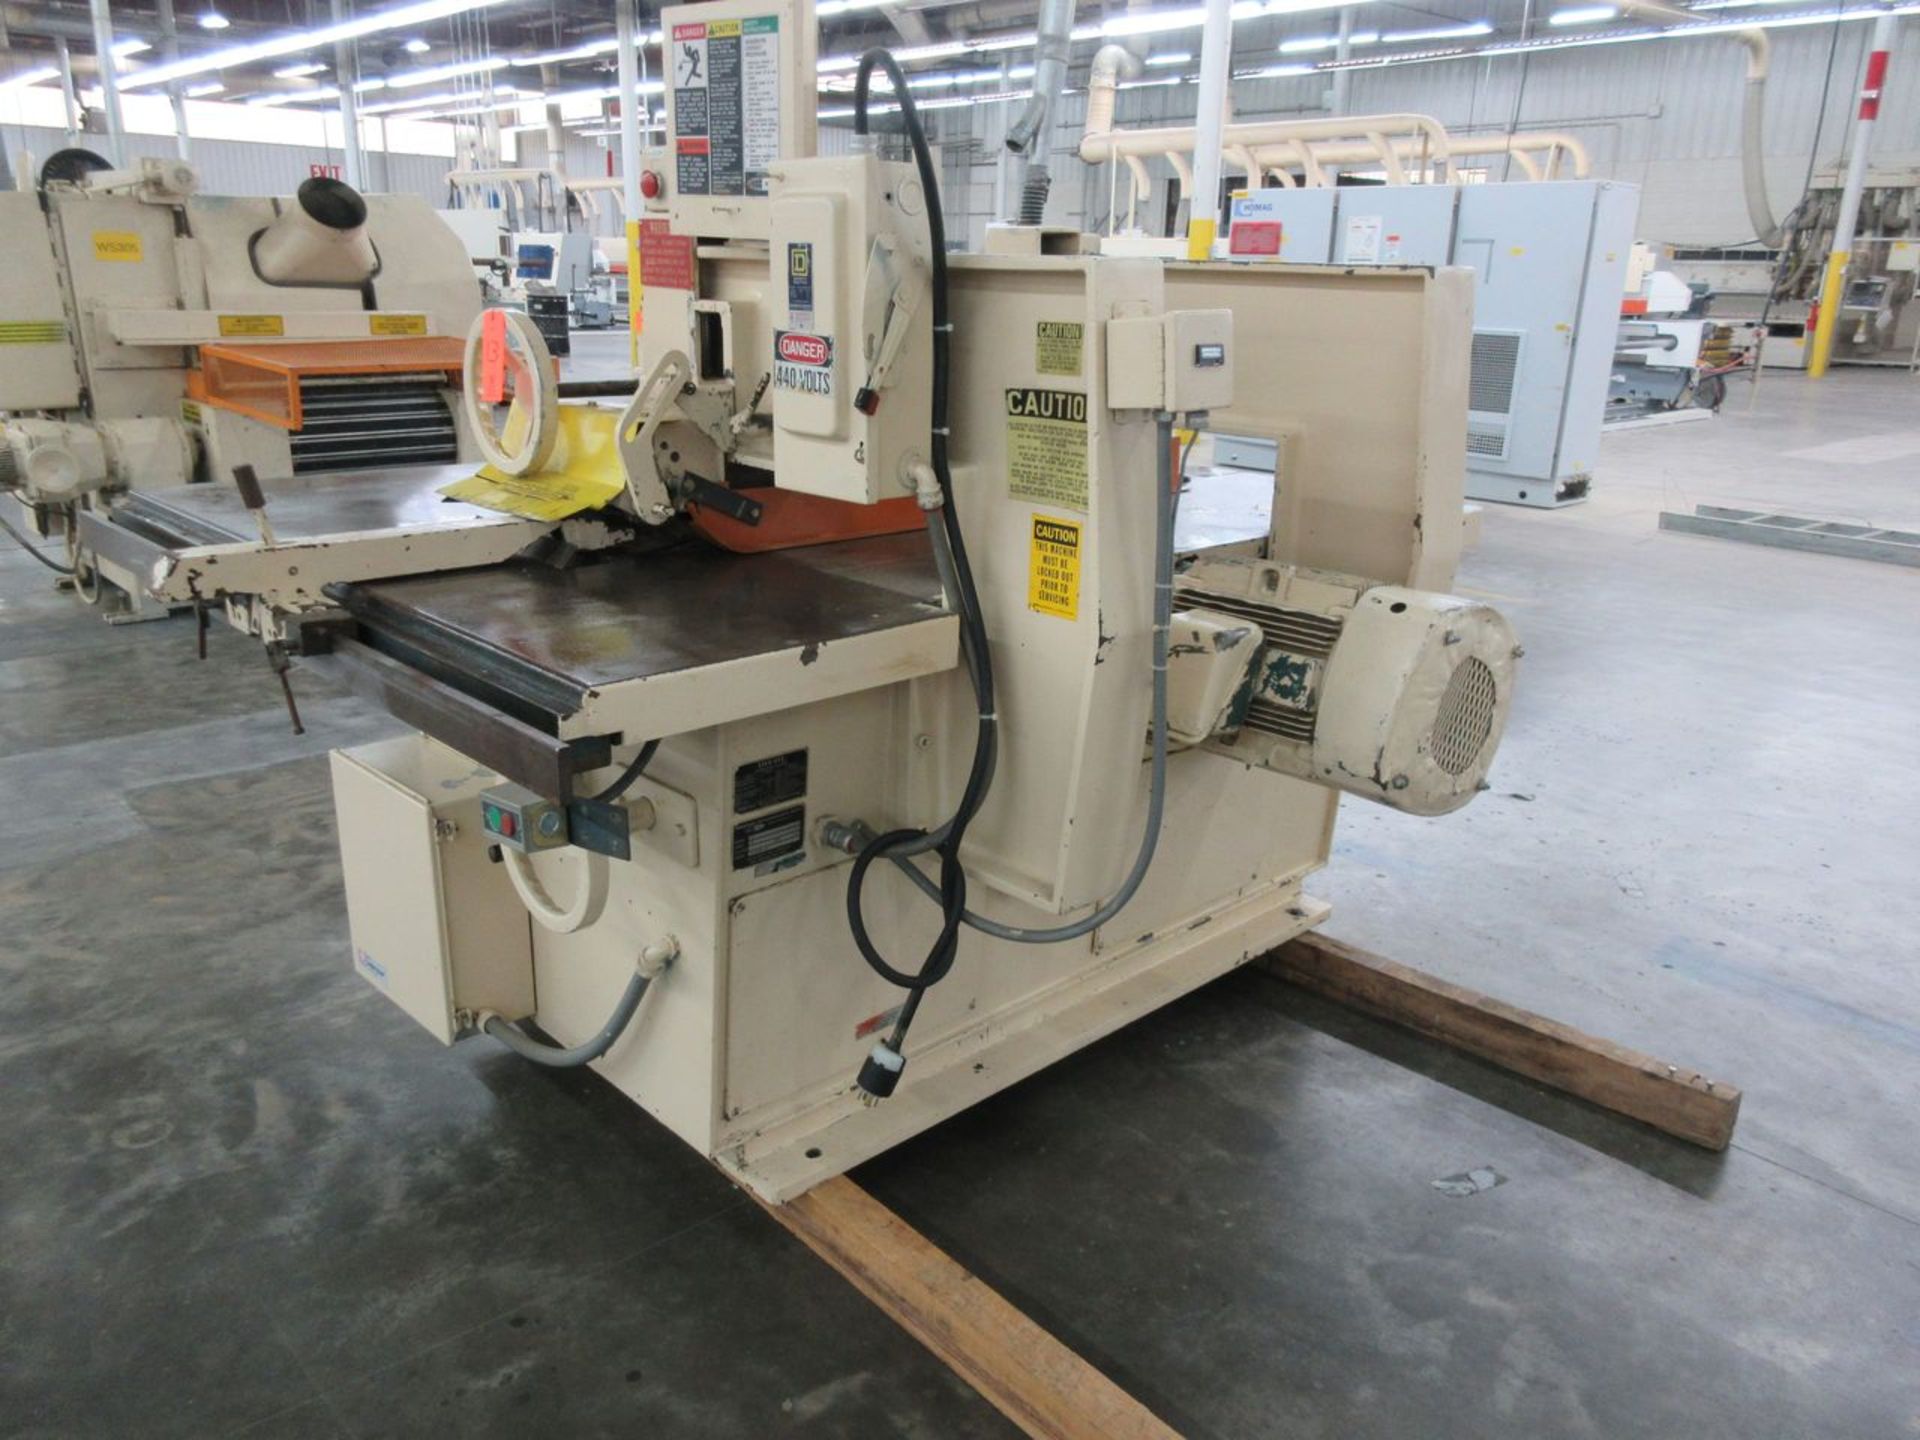 Diehl Model SL-52 Straight Line Chain-Fed Rip Saw, S/N: 10/85M4860-4276; with 25 in. Throat, 15-HP - Image 4 of 7